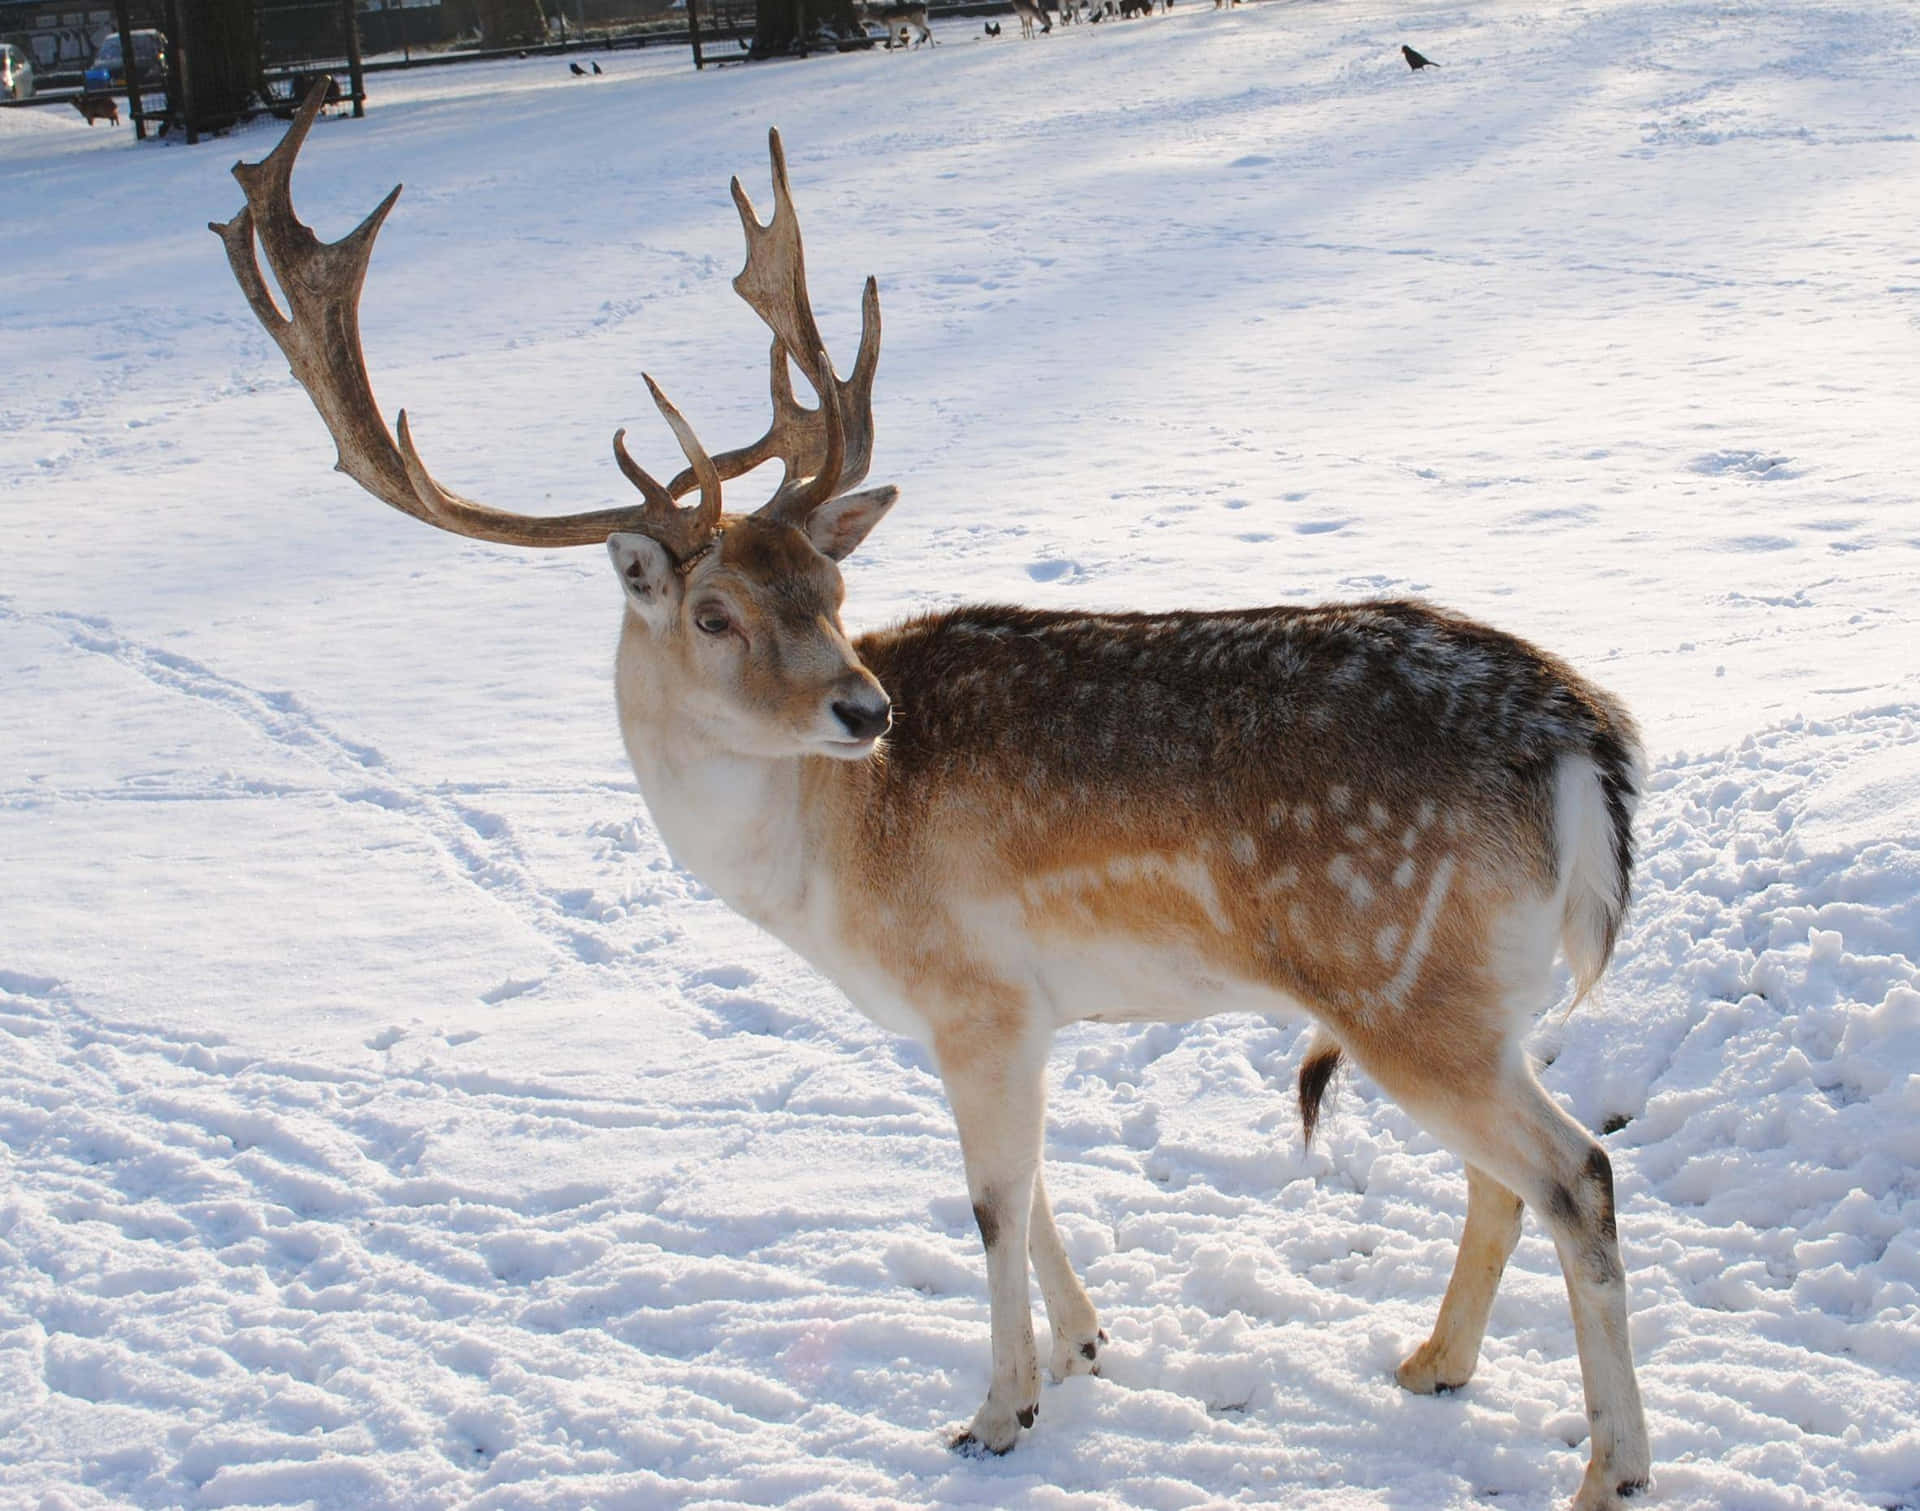 A Reindeer Standing in the Snowy Tundra